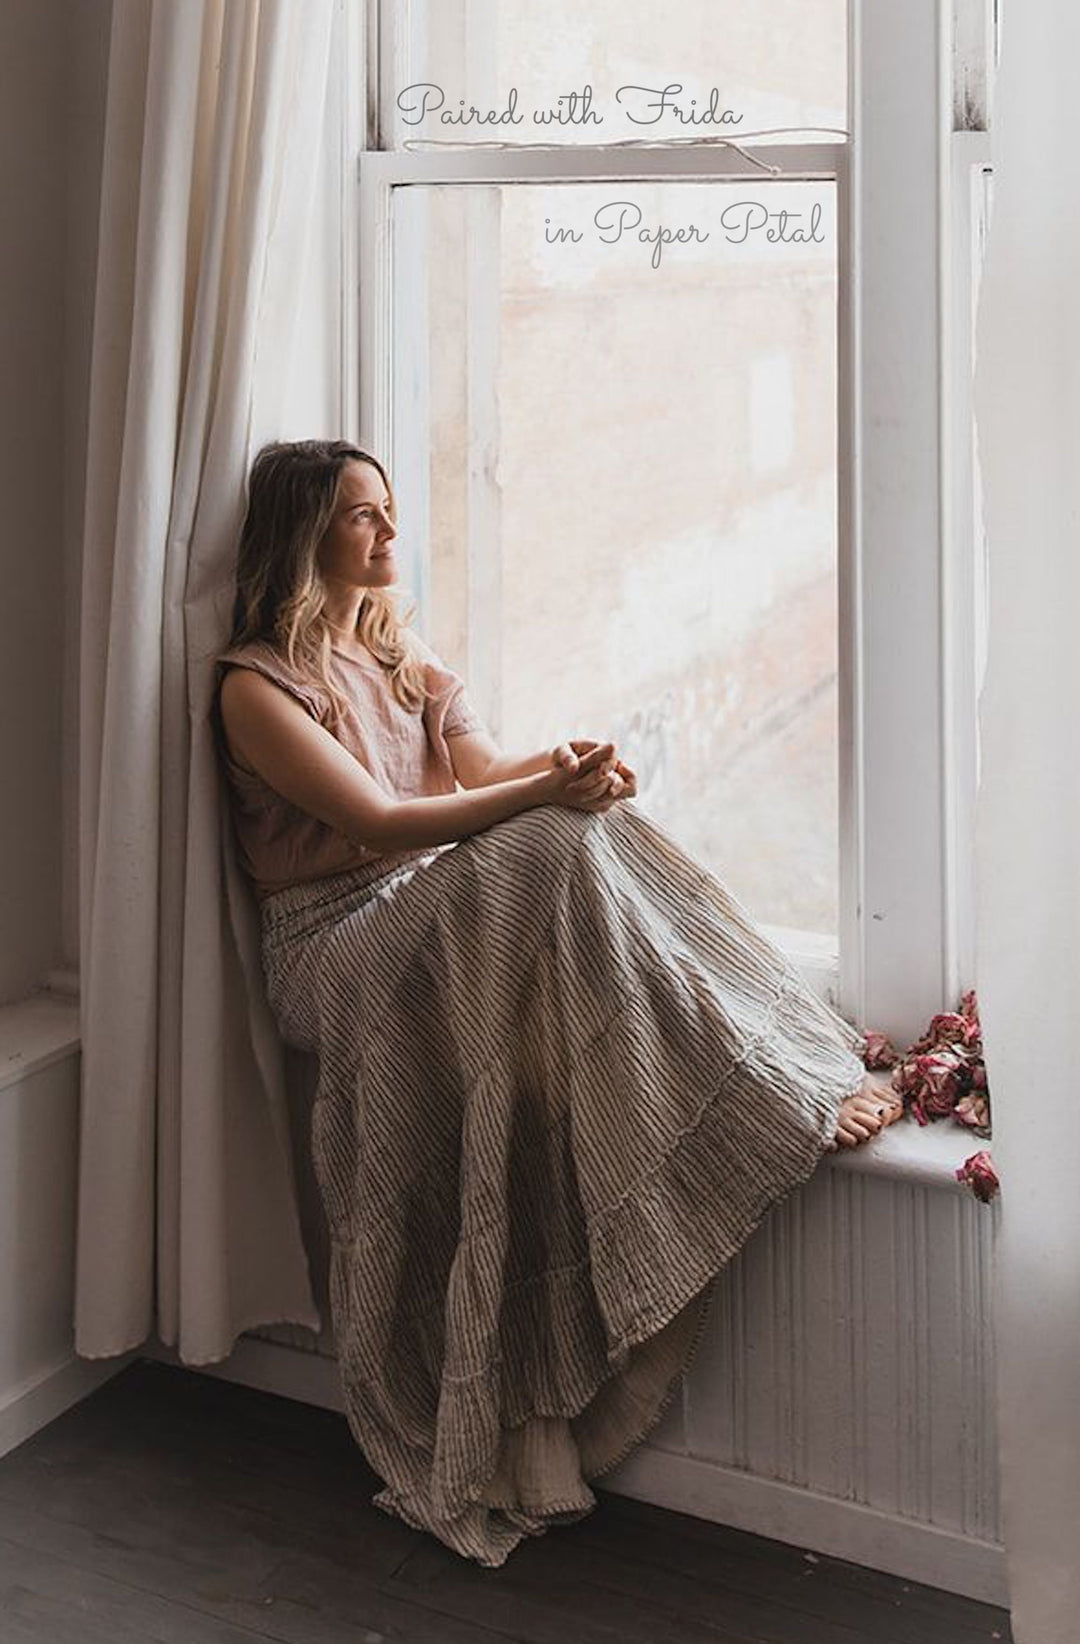 Female model sits on ledge of window sill with bare feet. She is smiling and looking out the window with hands resting on her knees. She is wearing a light pink top and long white skirt with blue pinstripes.